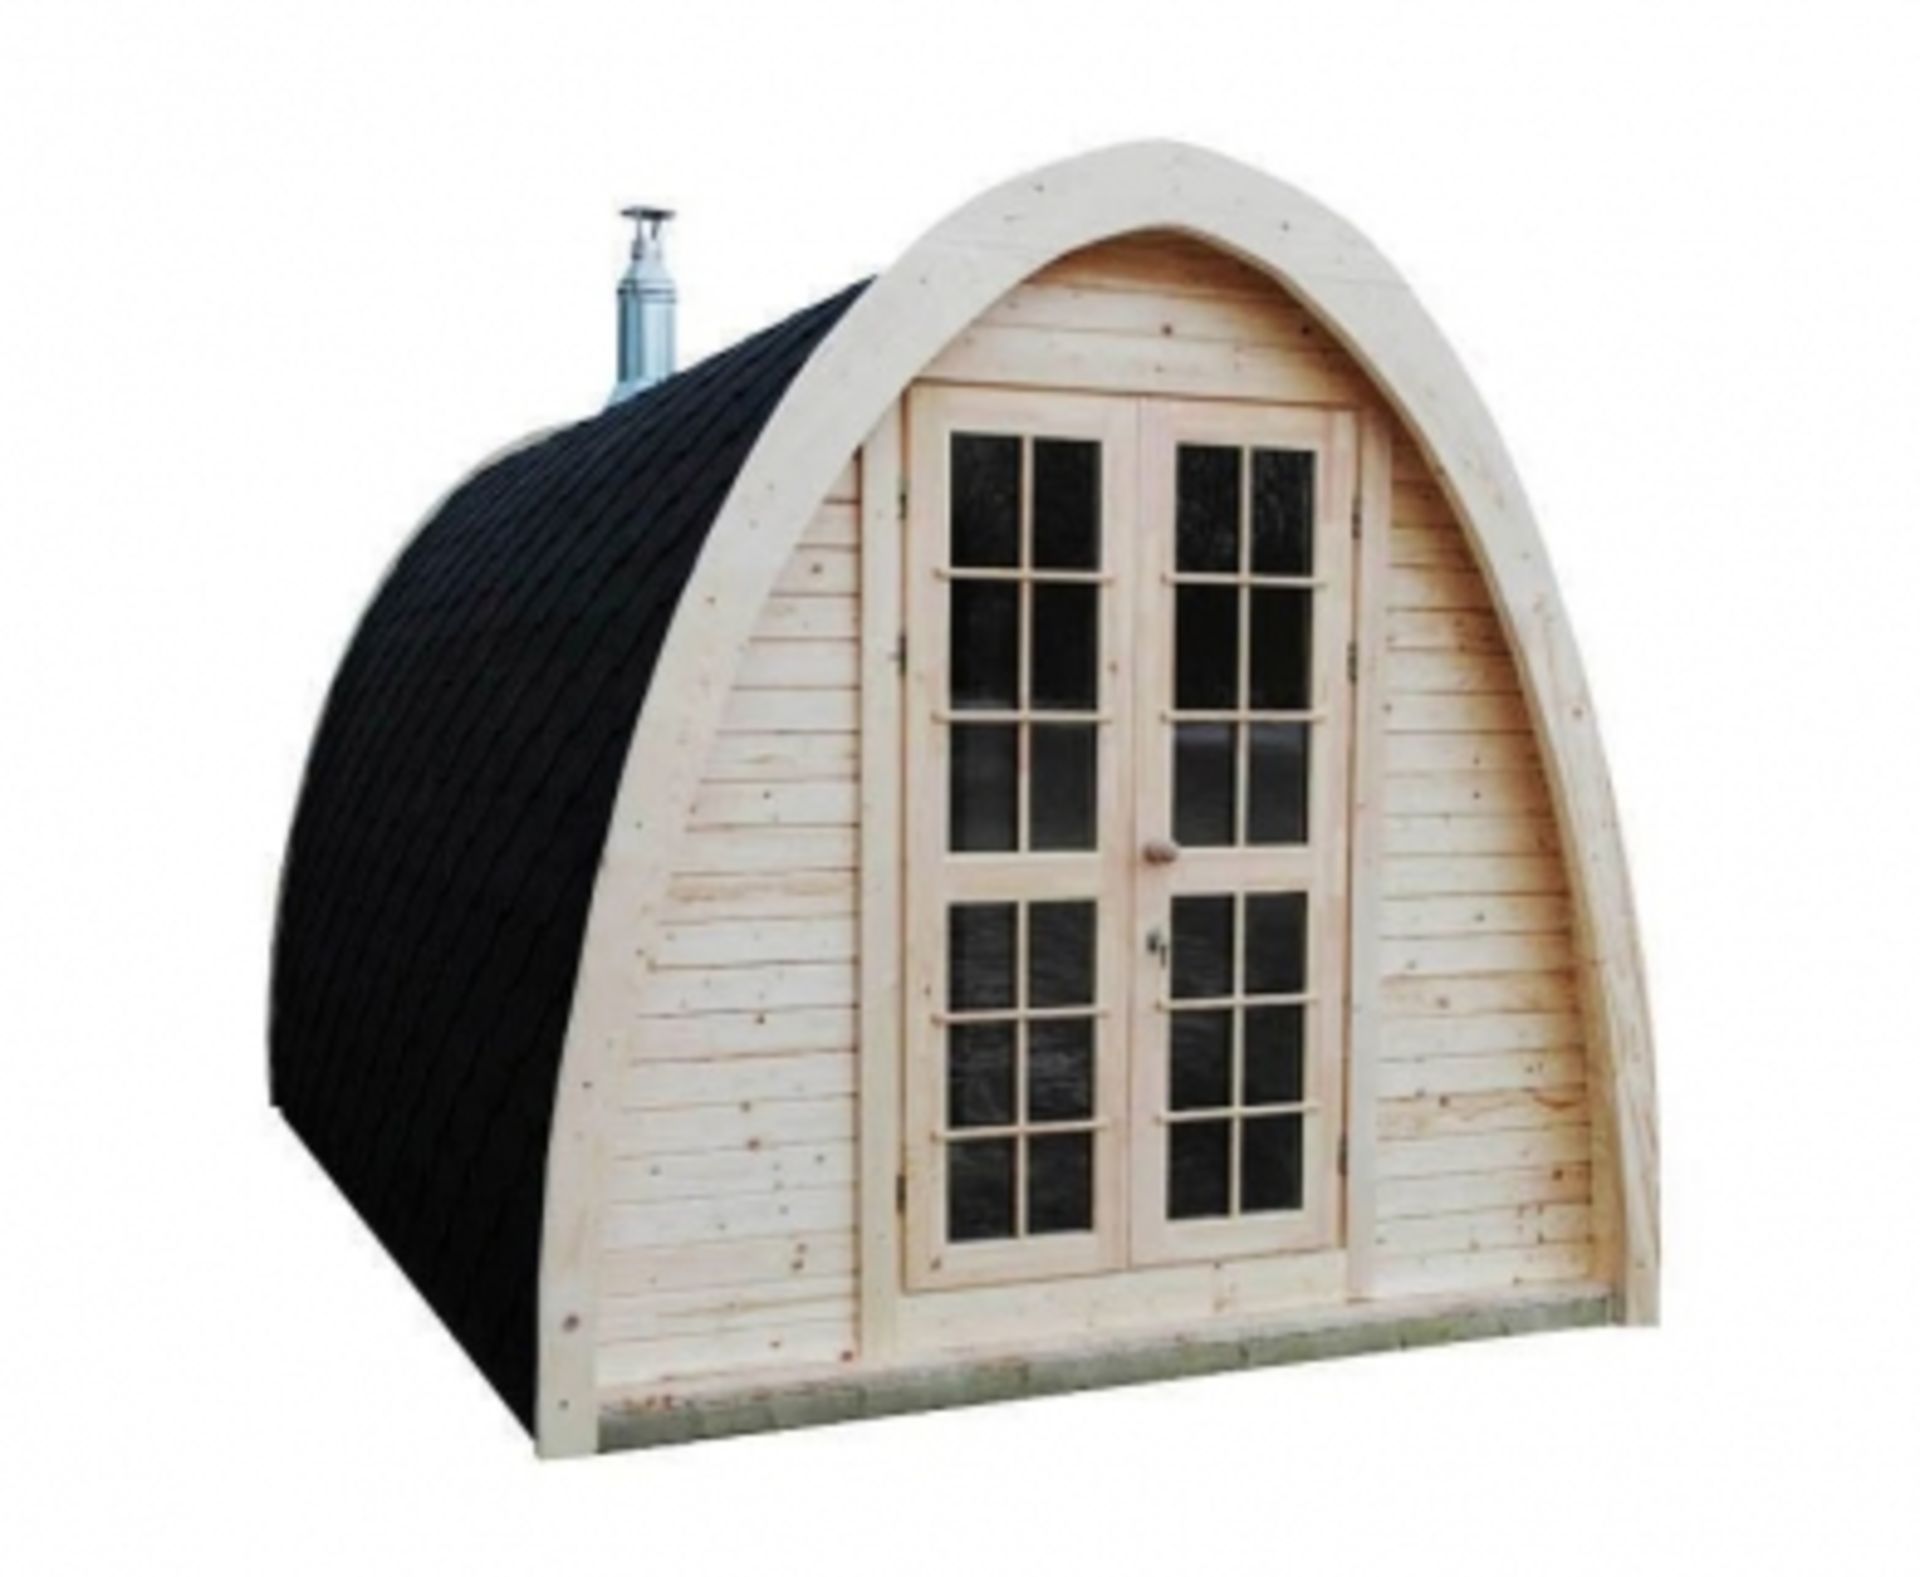 V Brand New 2.4 x 2.3m Sauna Pod From Thermo Wood - Roof Covered With Bitumen Shingles - Two